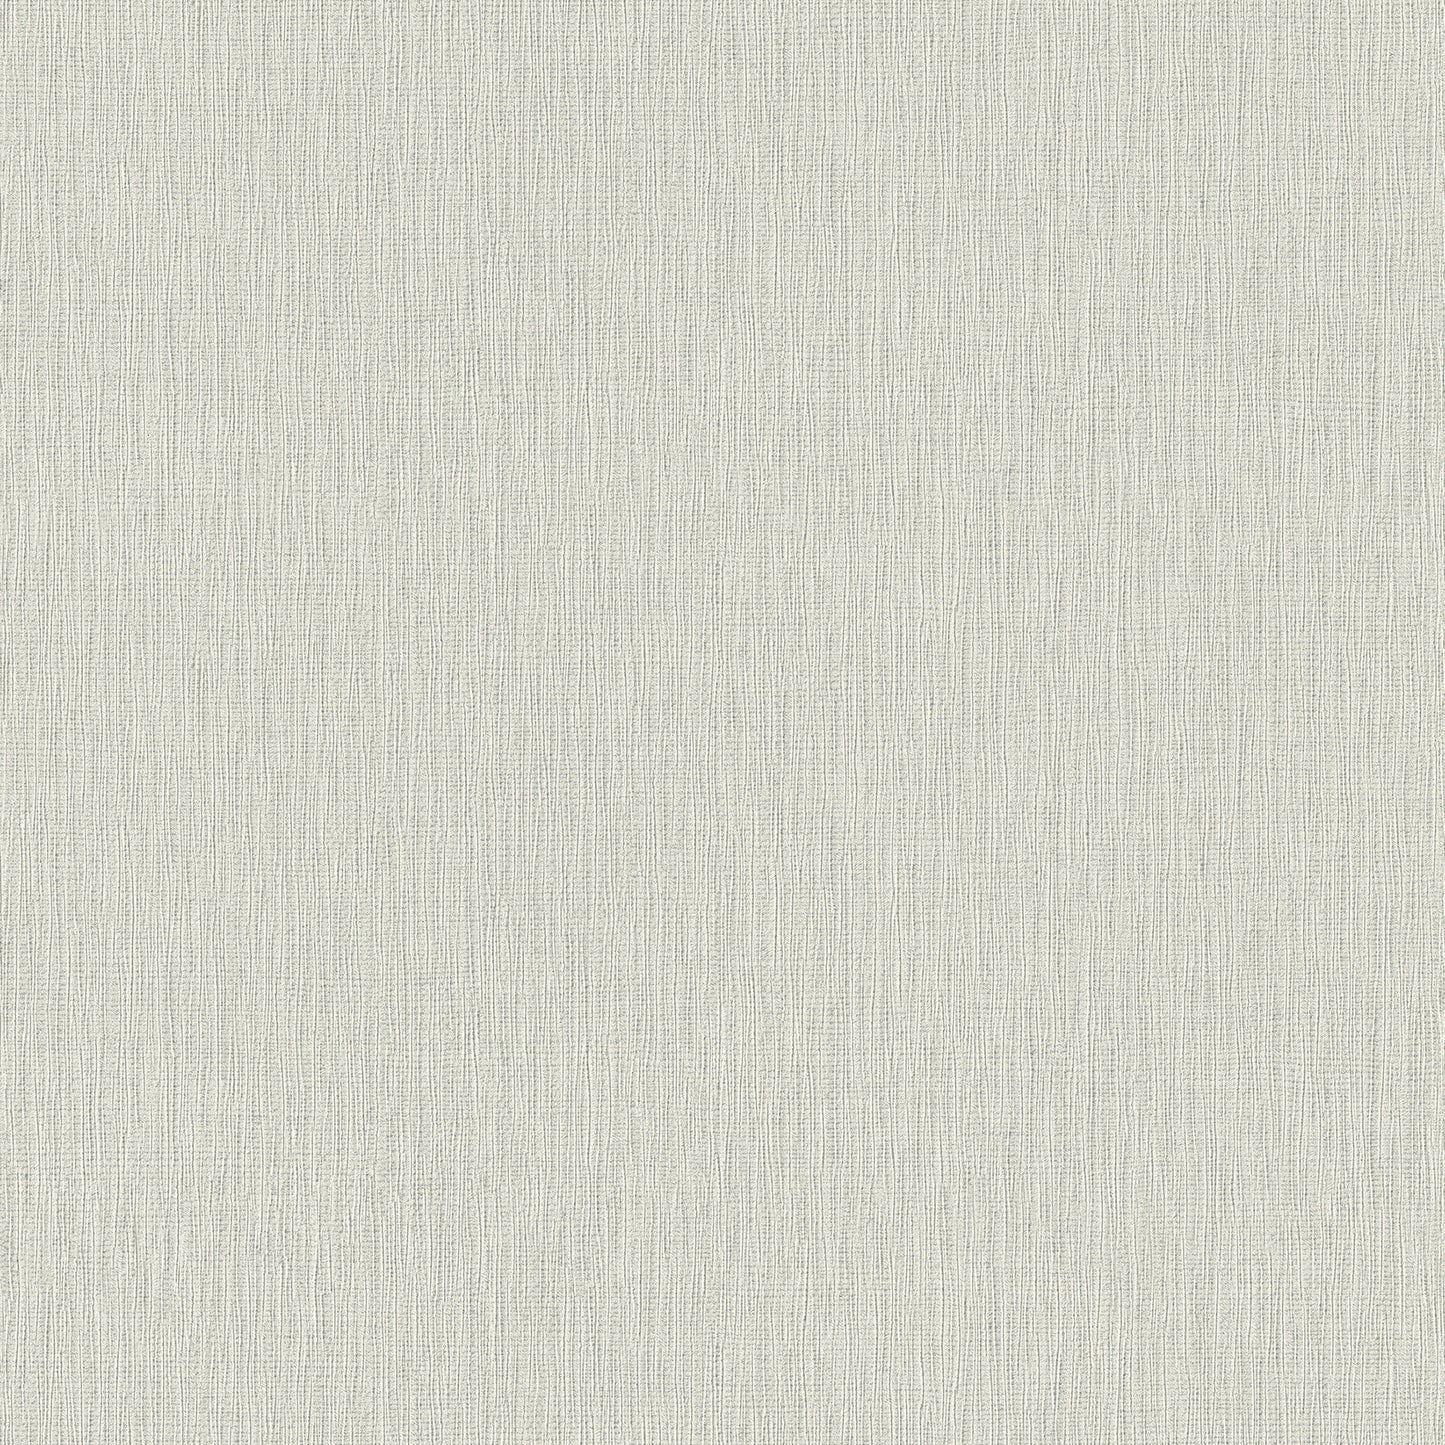 Find 4015-550436 Beyond Textures Haast Silver Vertical Woven Texture Silver by Advantage